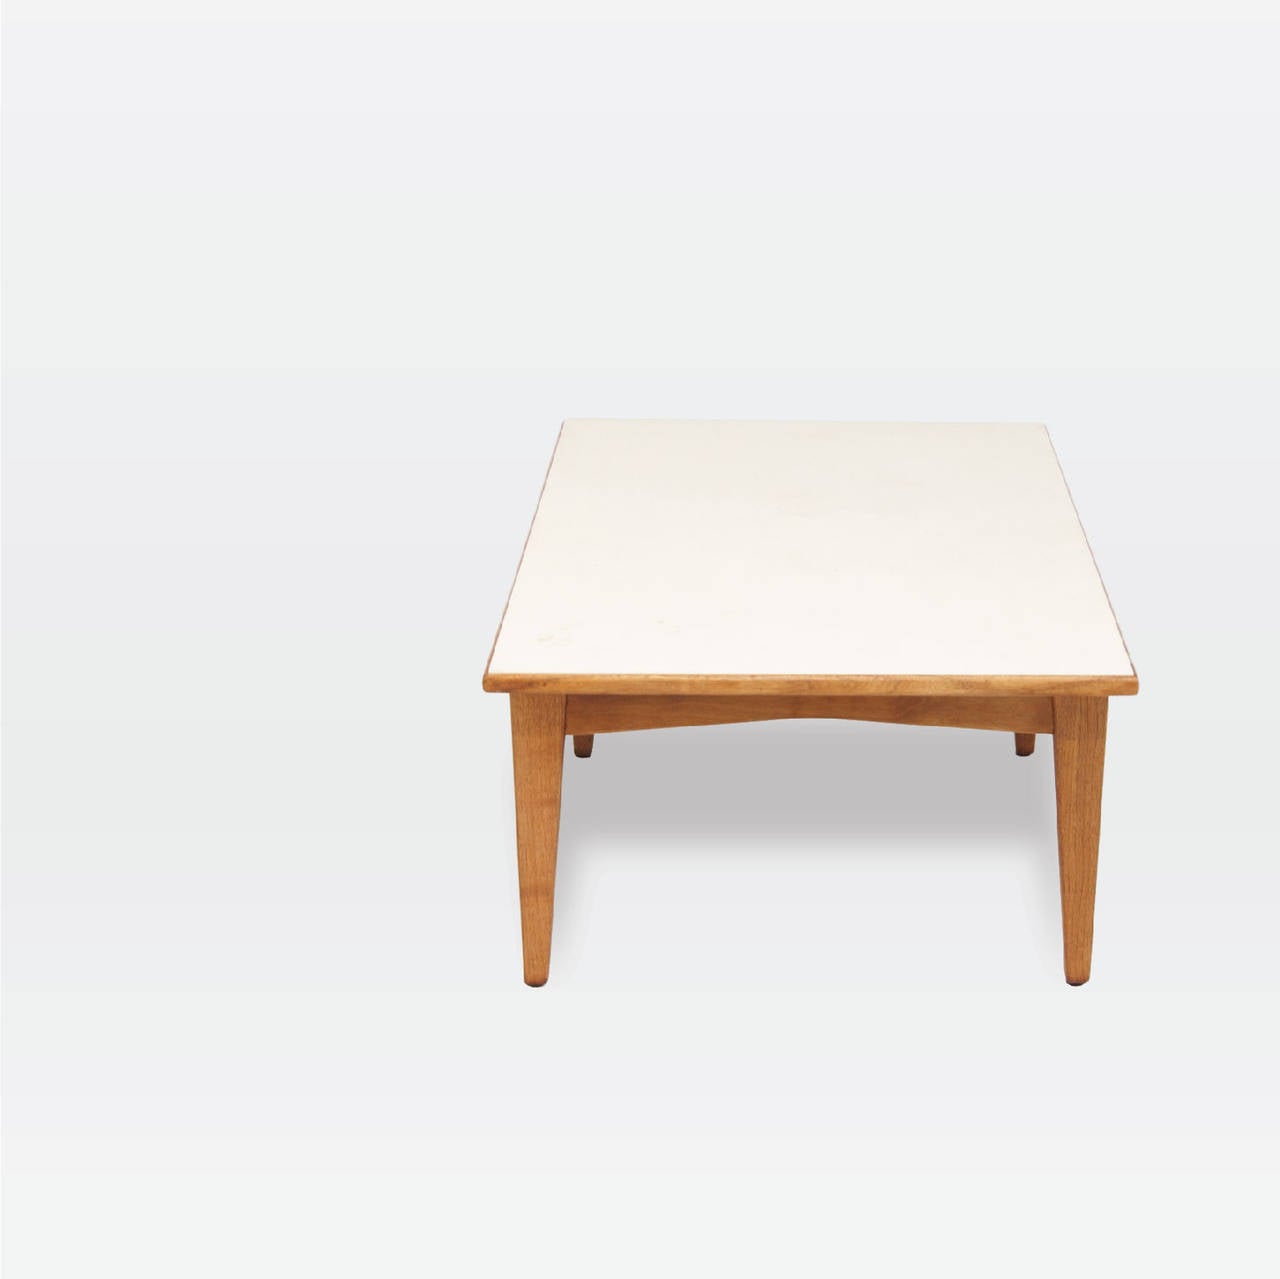 An occasional table in solid walnut featuring four tapered legs supporting a floating rectangular white laminate top.